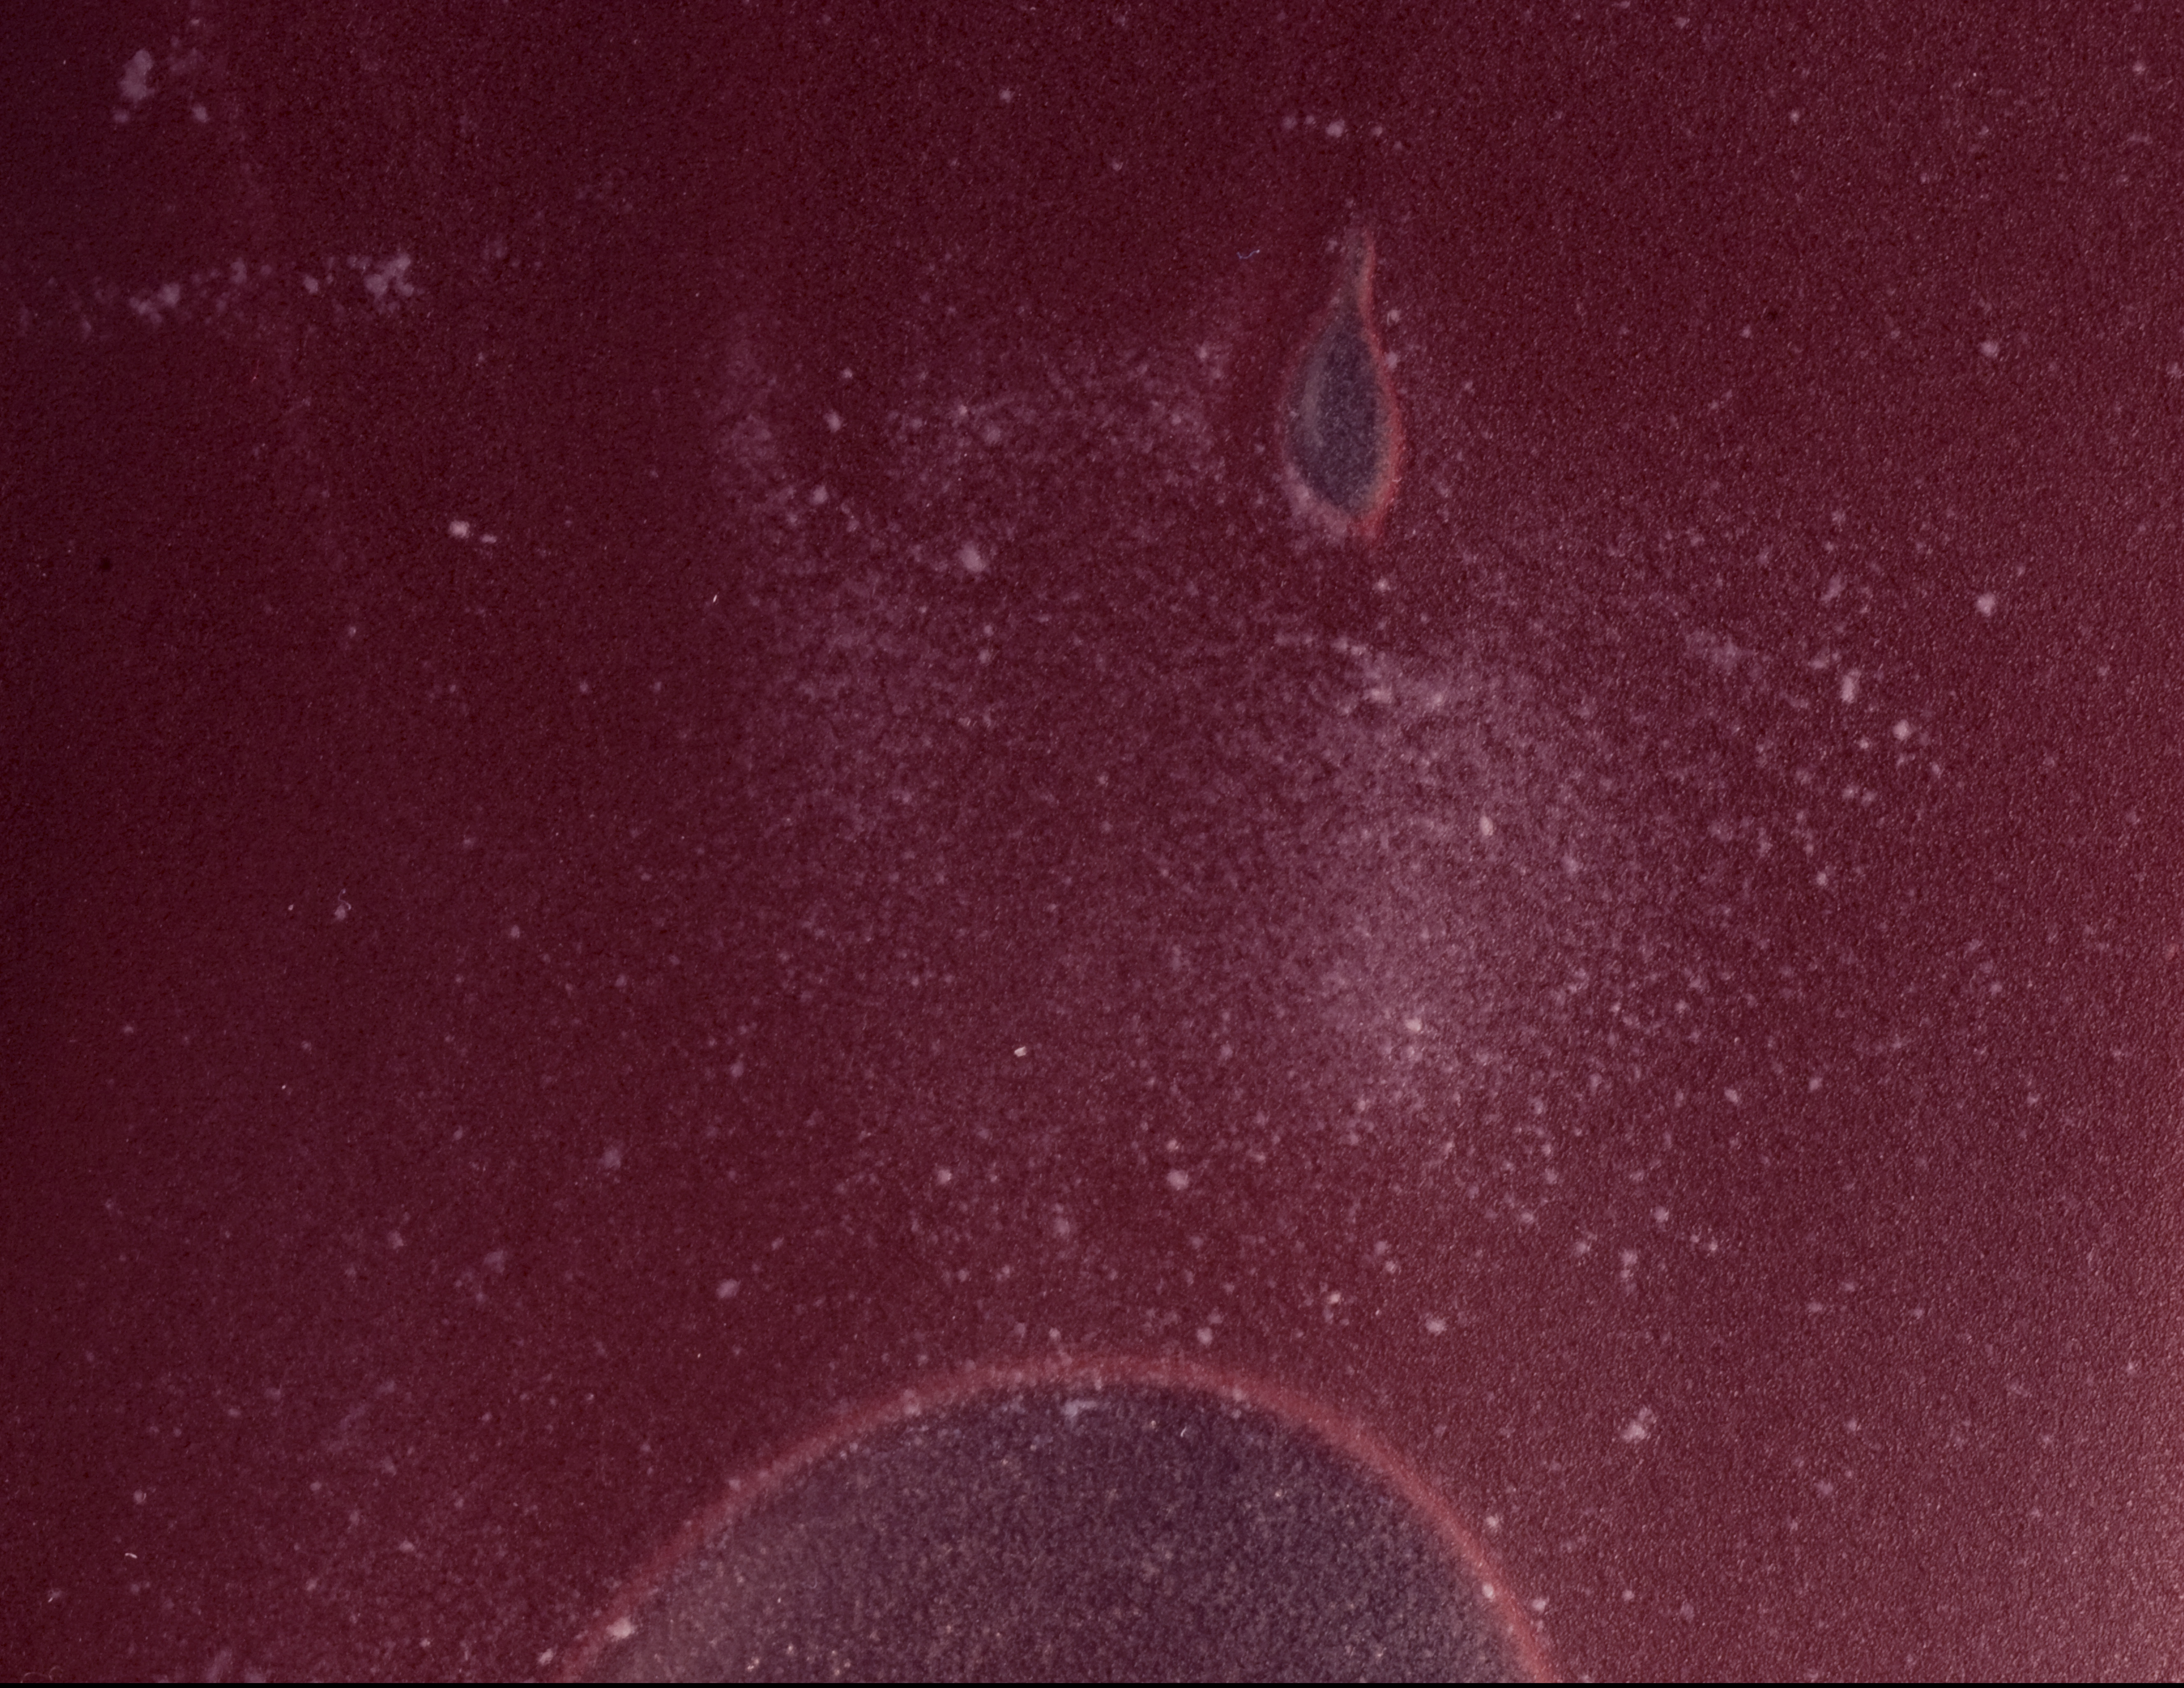 A close up view of many small white dots in a red cell unit.